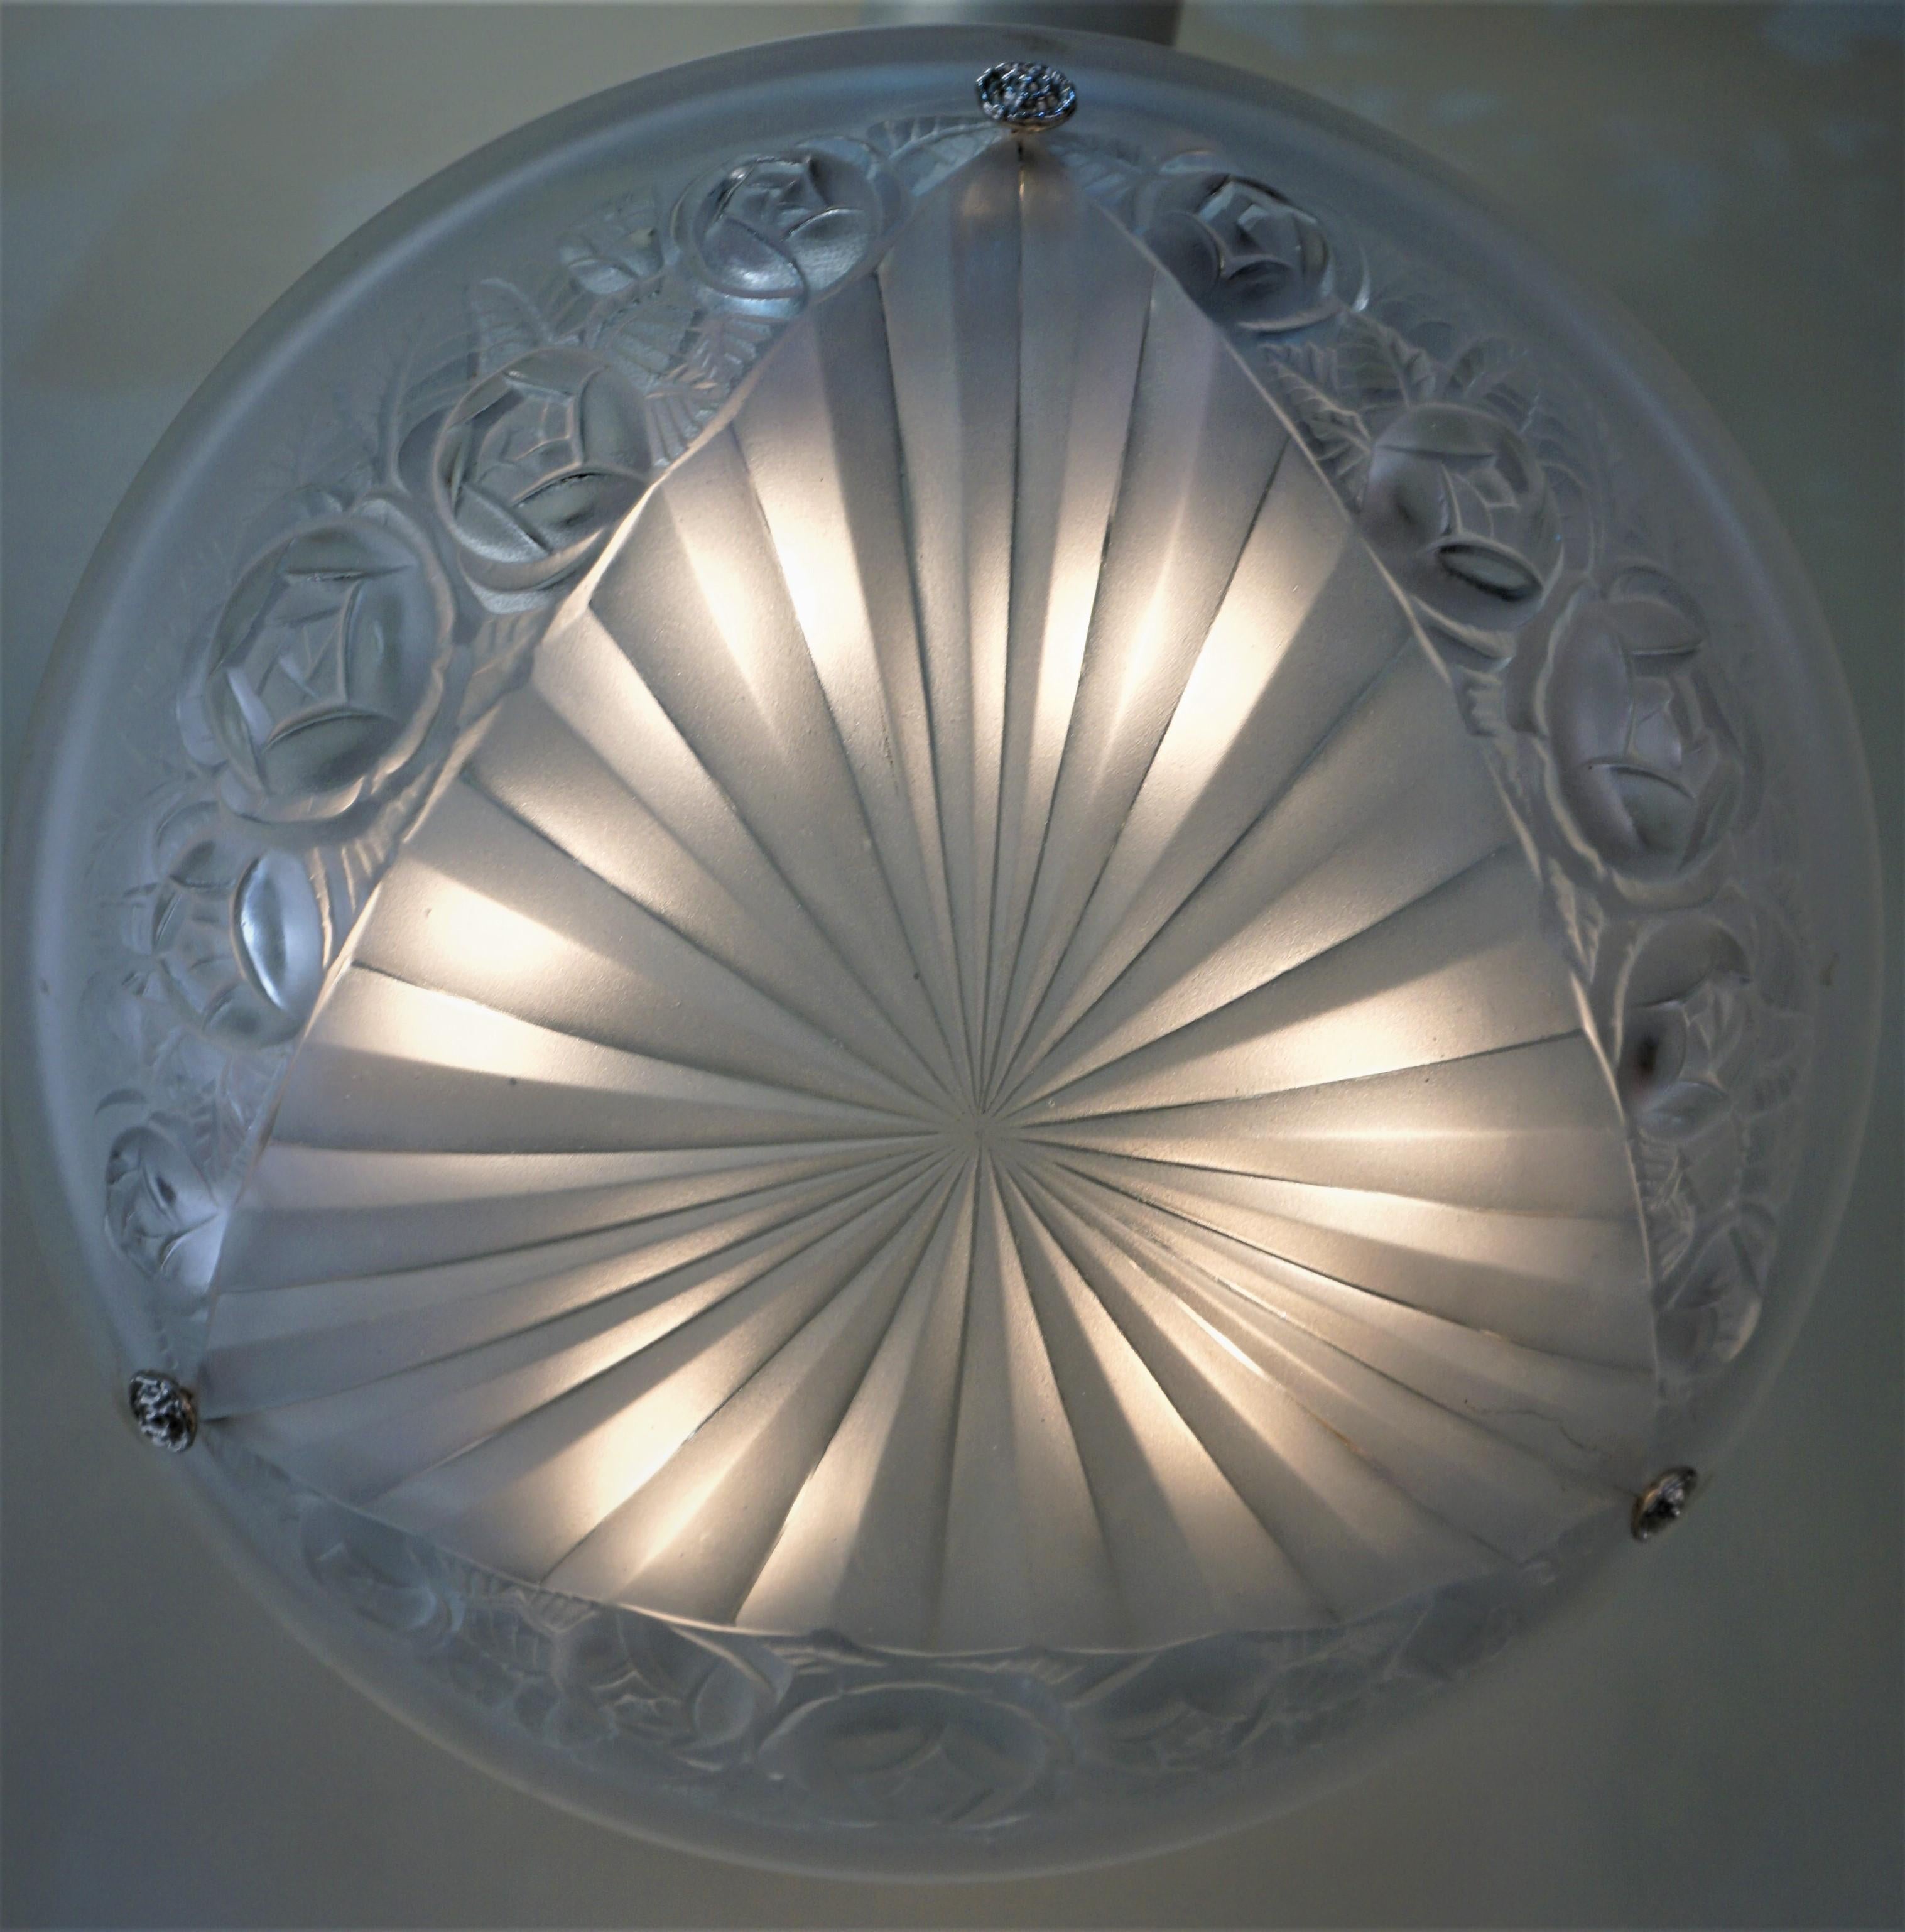 Mid-20th Century French Art Deco Chandelier by Degue